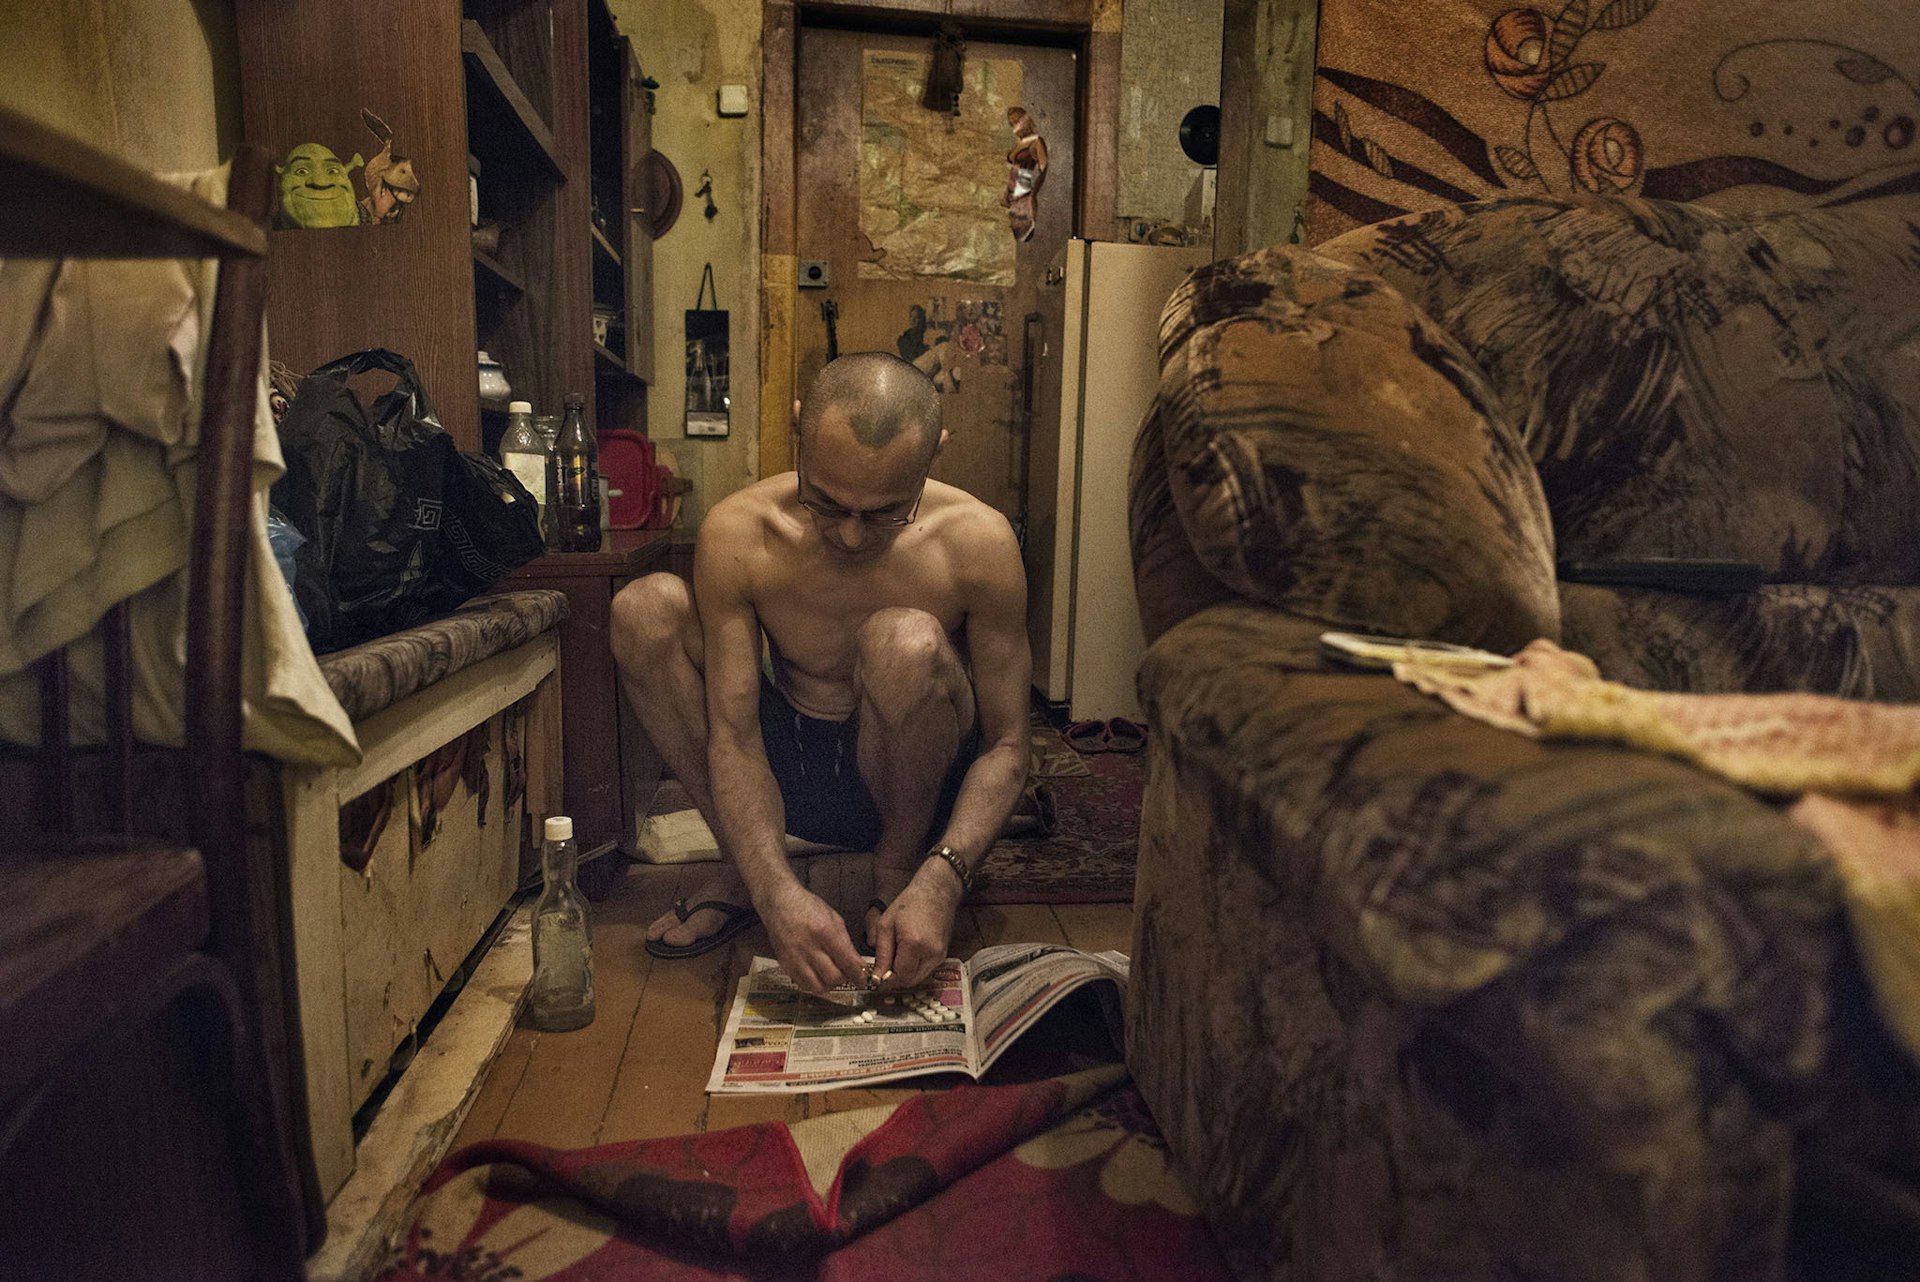 Revisiting the wreckage of Russia’s Krokodil epidemic three years on